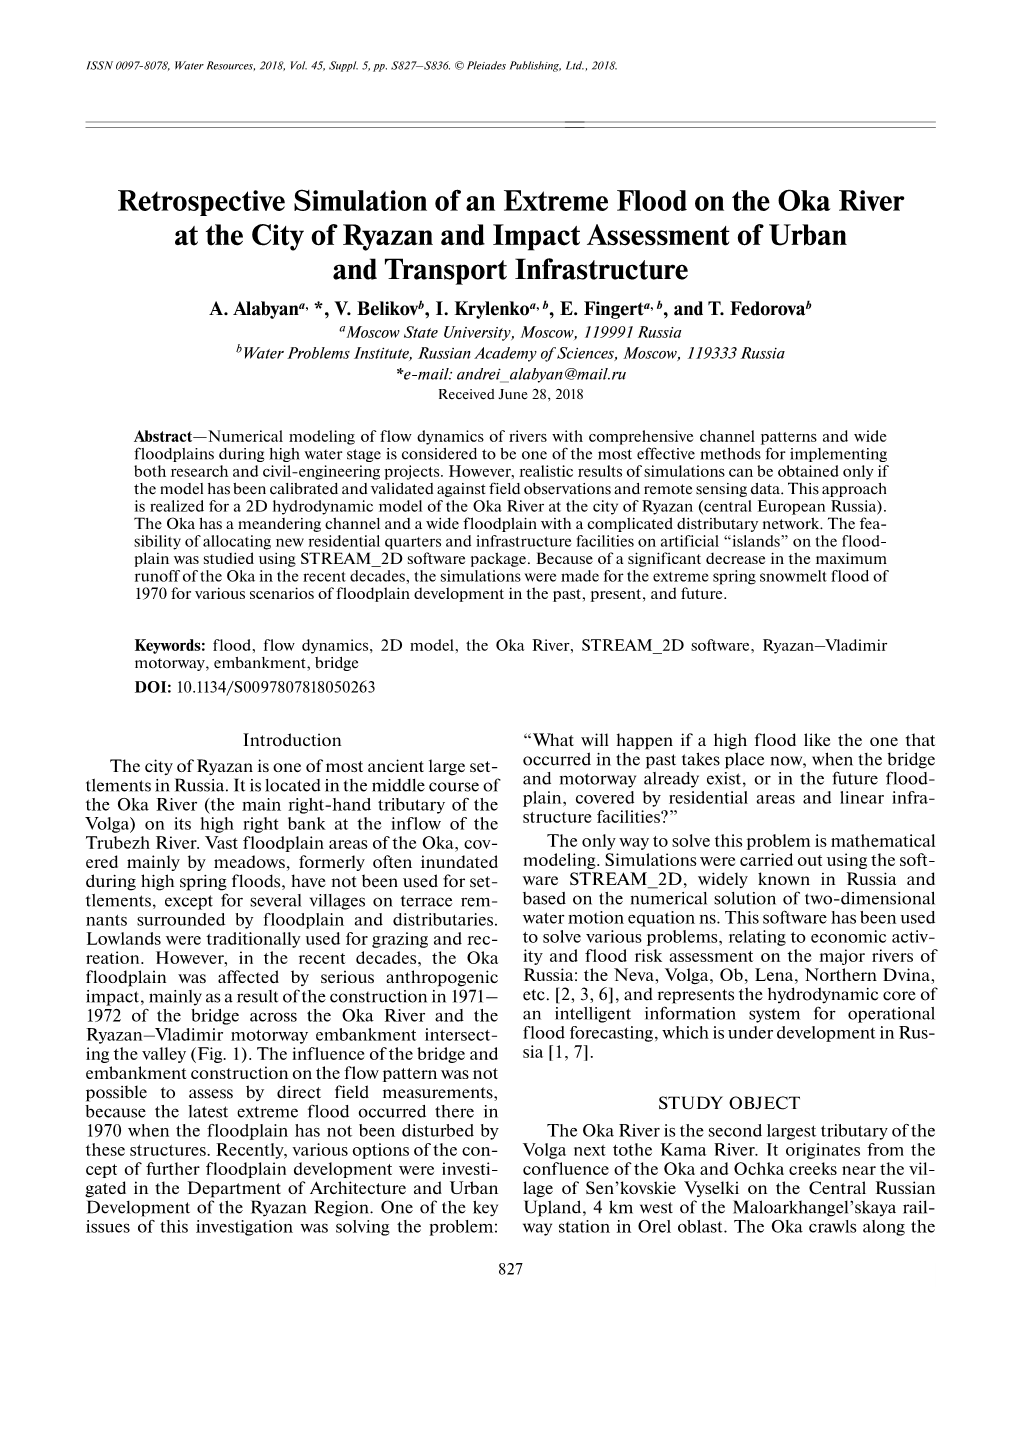 Retrospective Simulation of an Extreme Flood on the Oka River at the City of Ryazan and Impact Assessment of Urban and Transport Infrastructure A